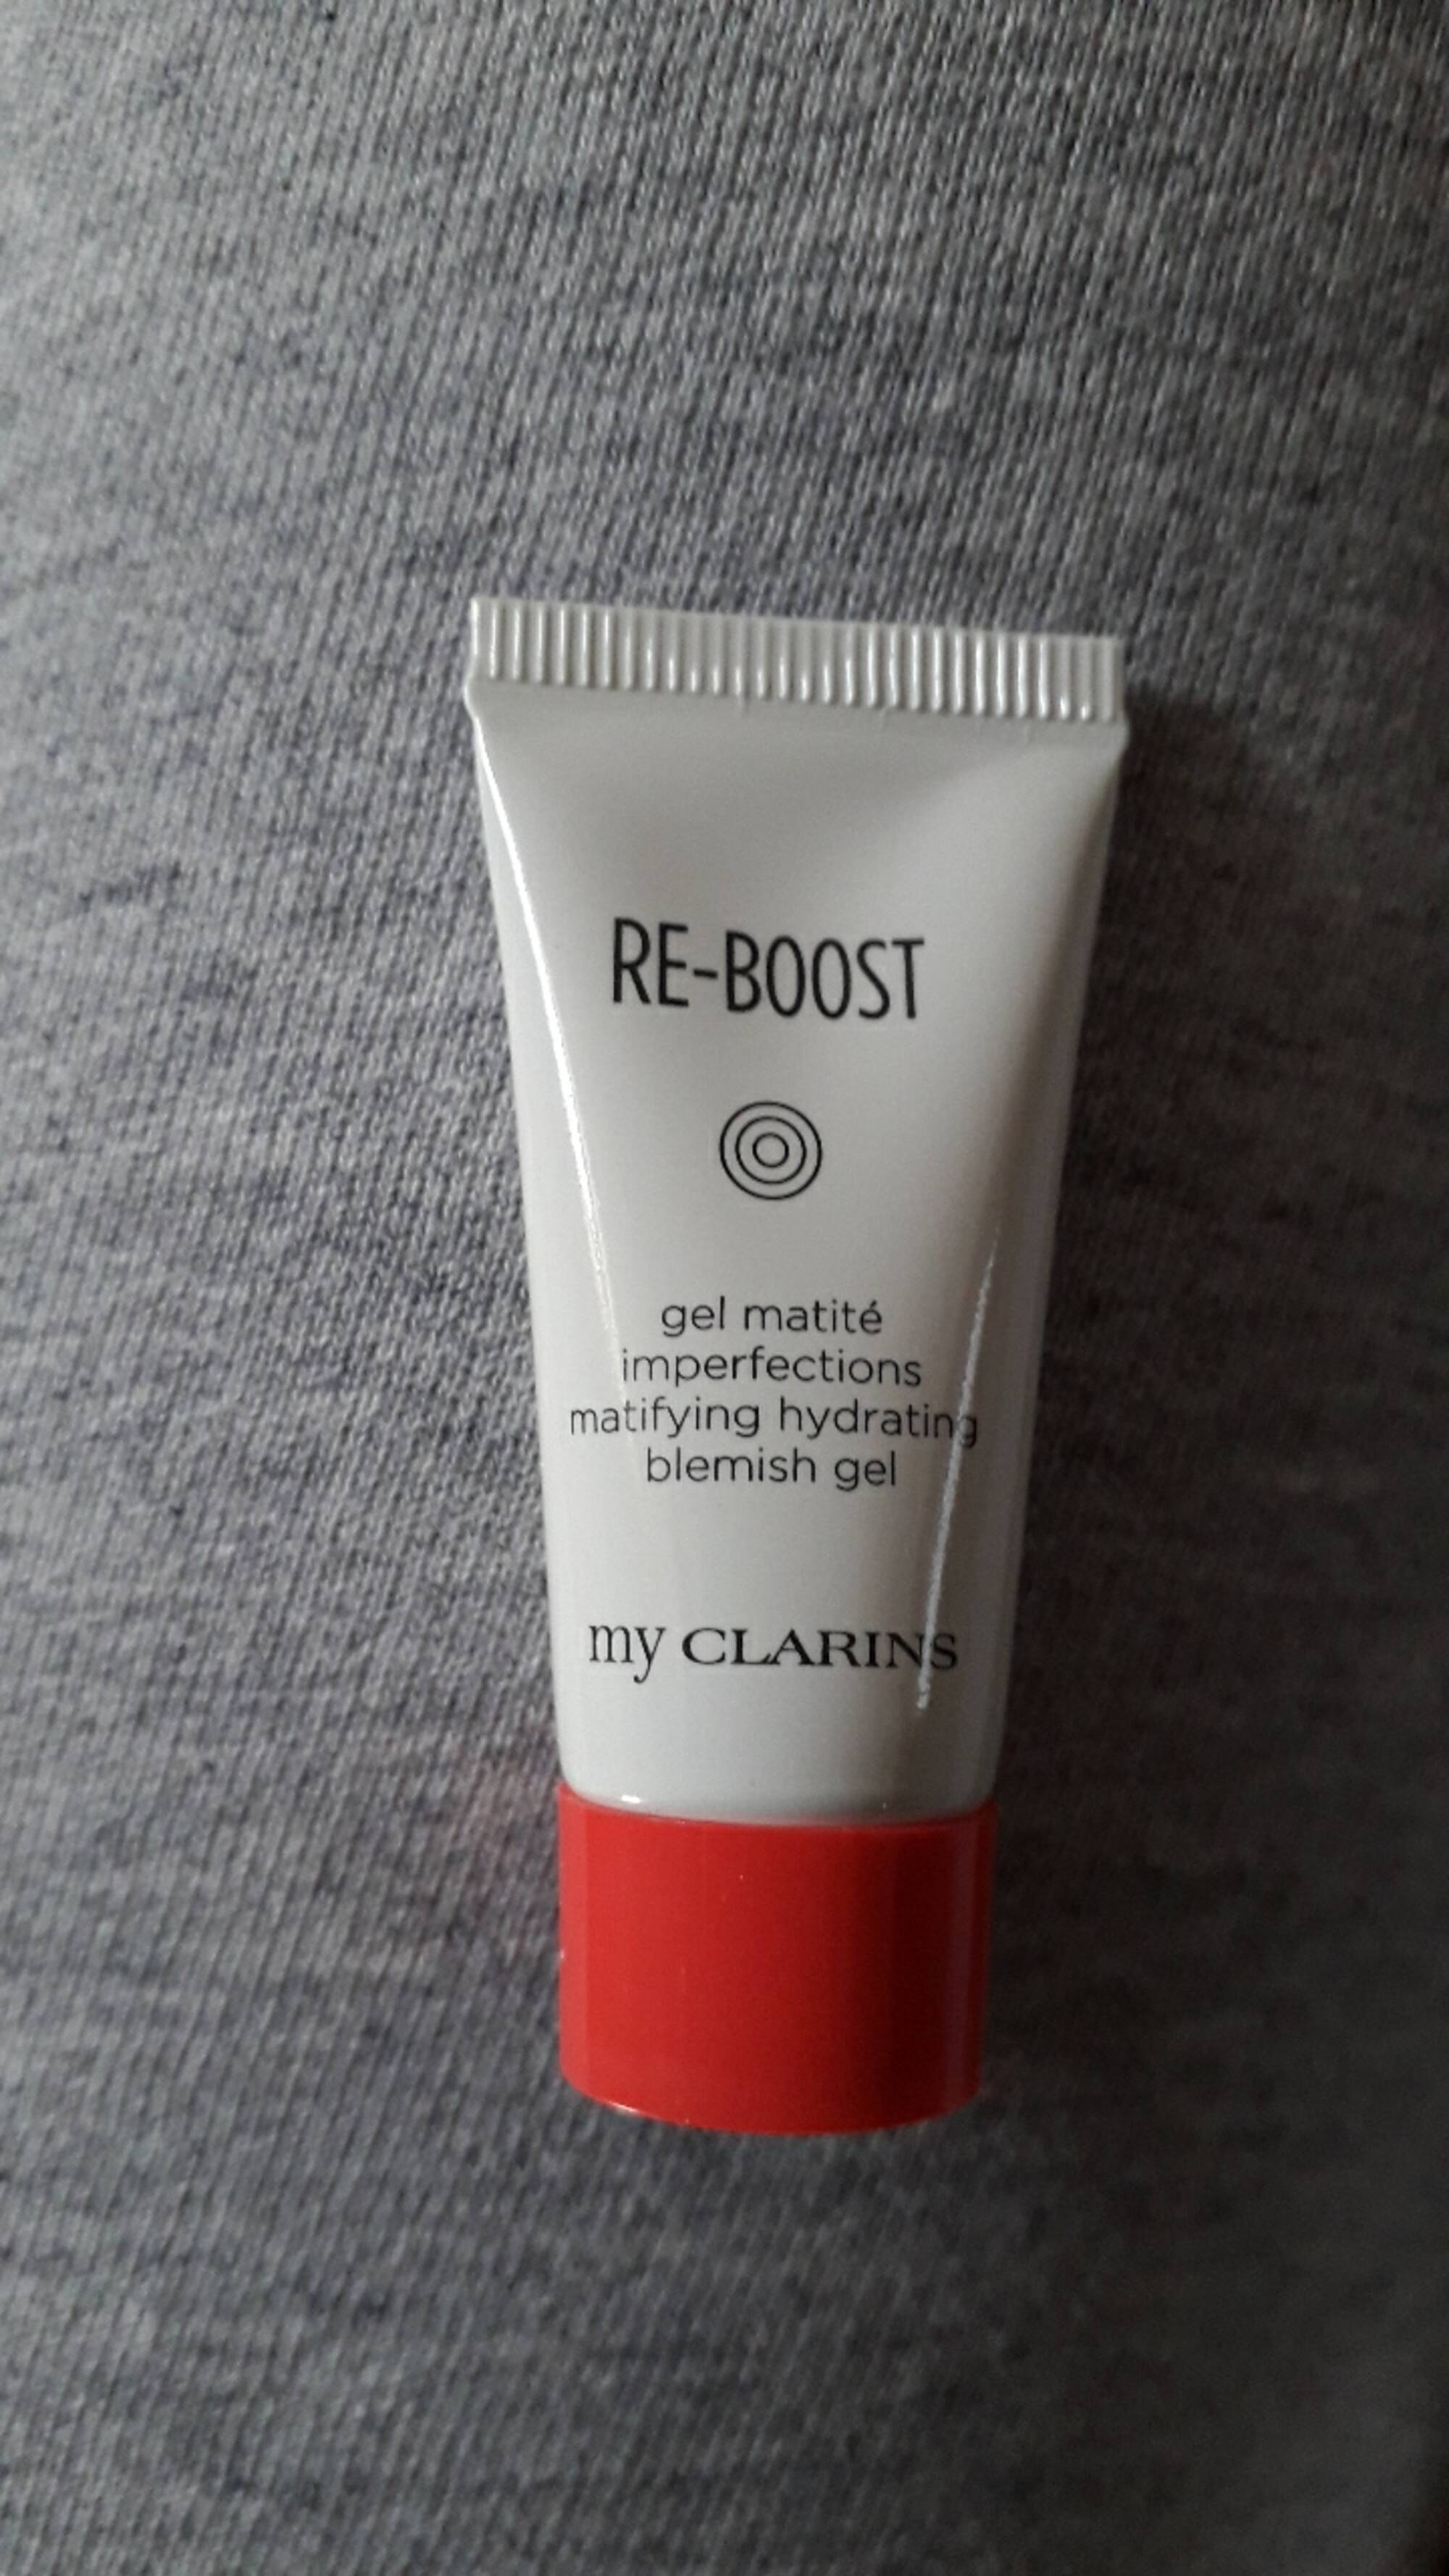 MY CLARINS - Re-boost - Gel matité imperfections